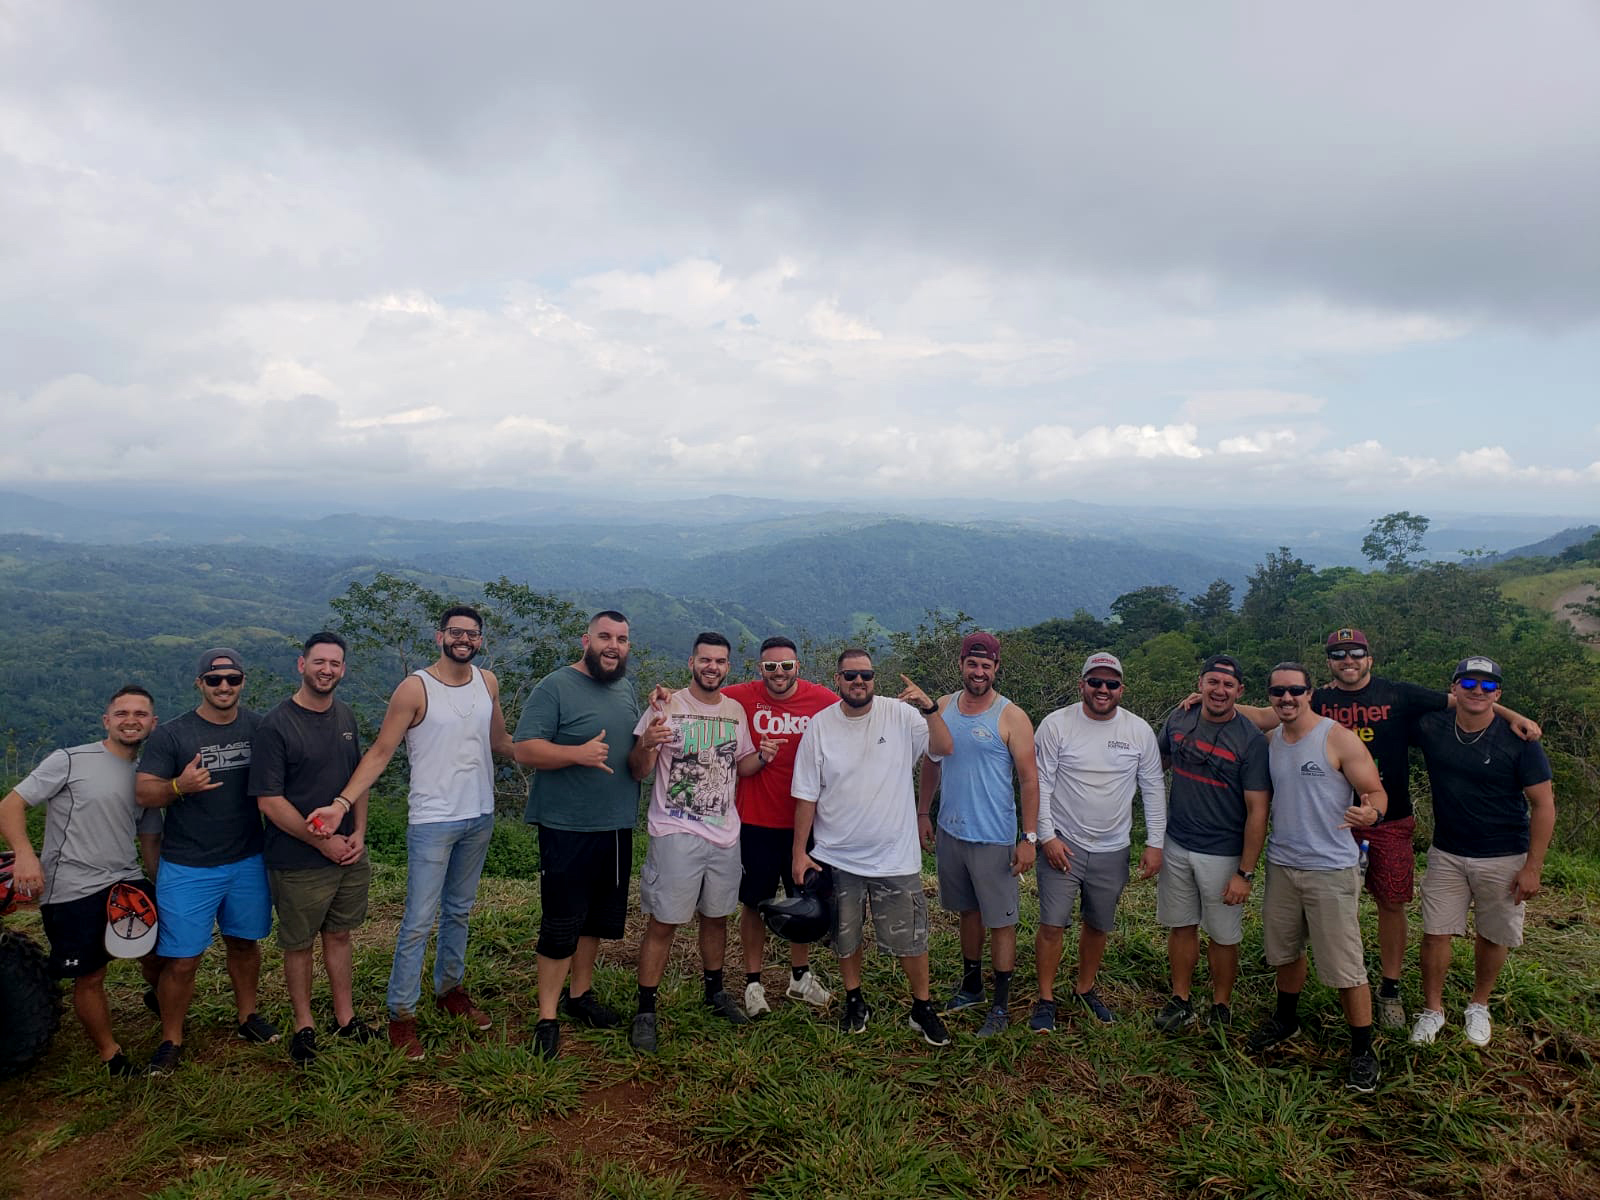 PHOTO: A group of 14 traveled from Miami to Costa Rica in October 2018. The friends were celebrating a bachelor party and four of them were killed in a whitewater-rafting accident.